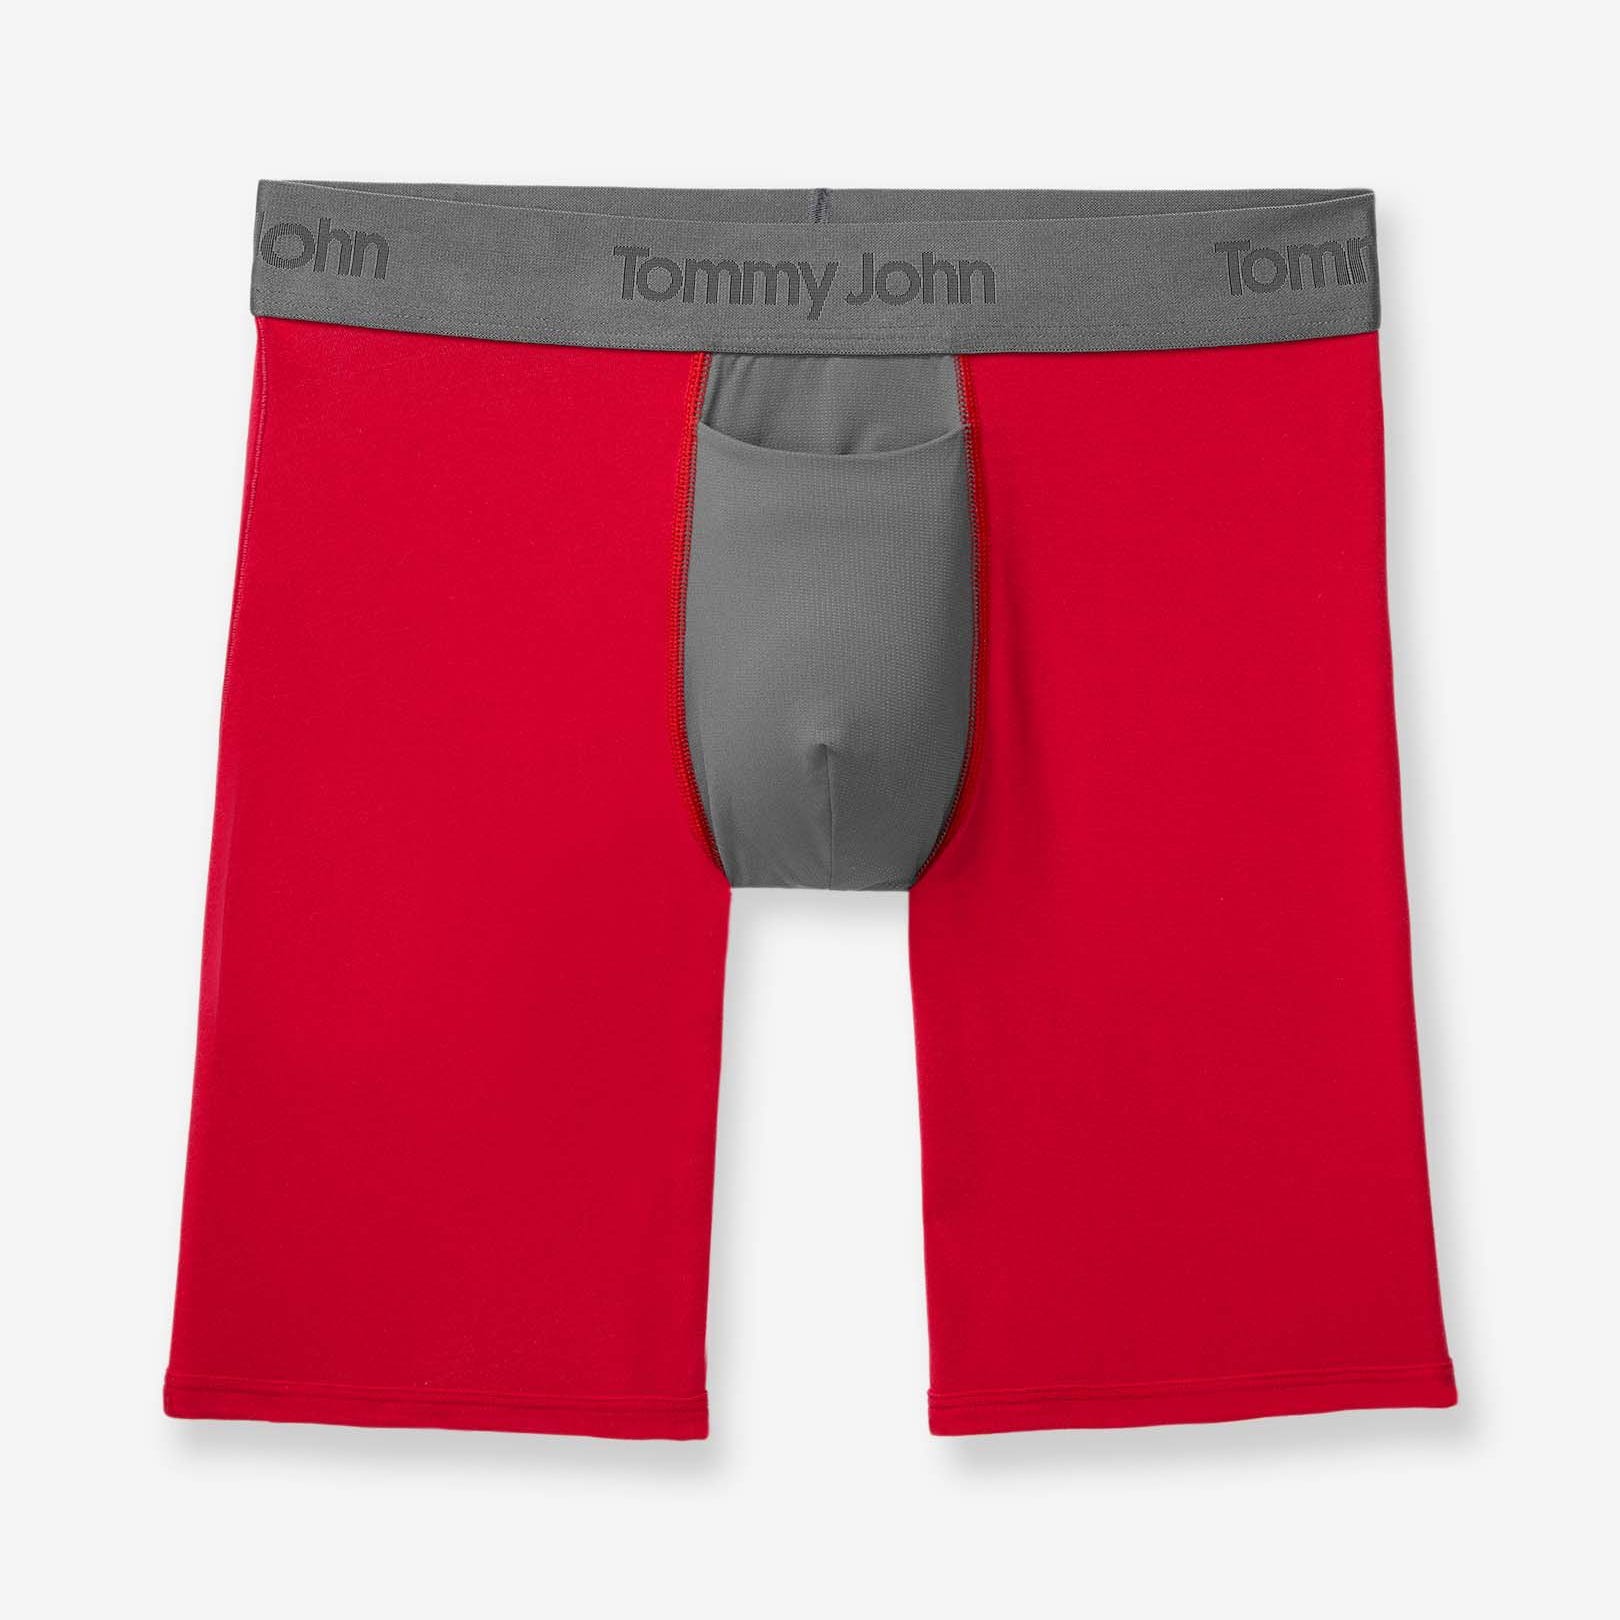 Tommy John Cyber Monday sale: Save 30% on our favorite underwear ...